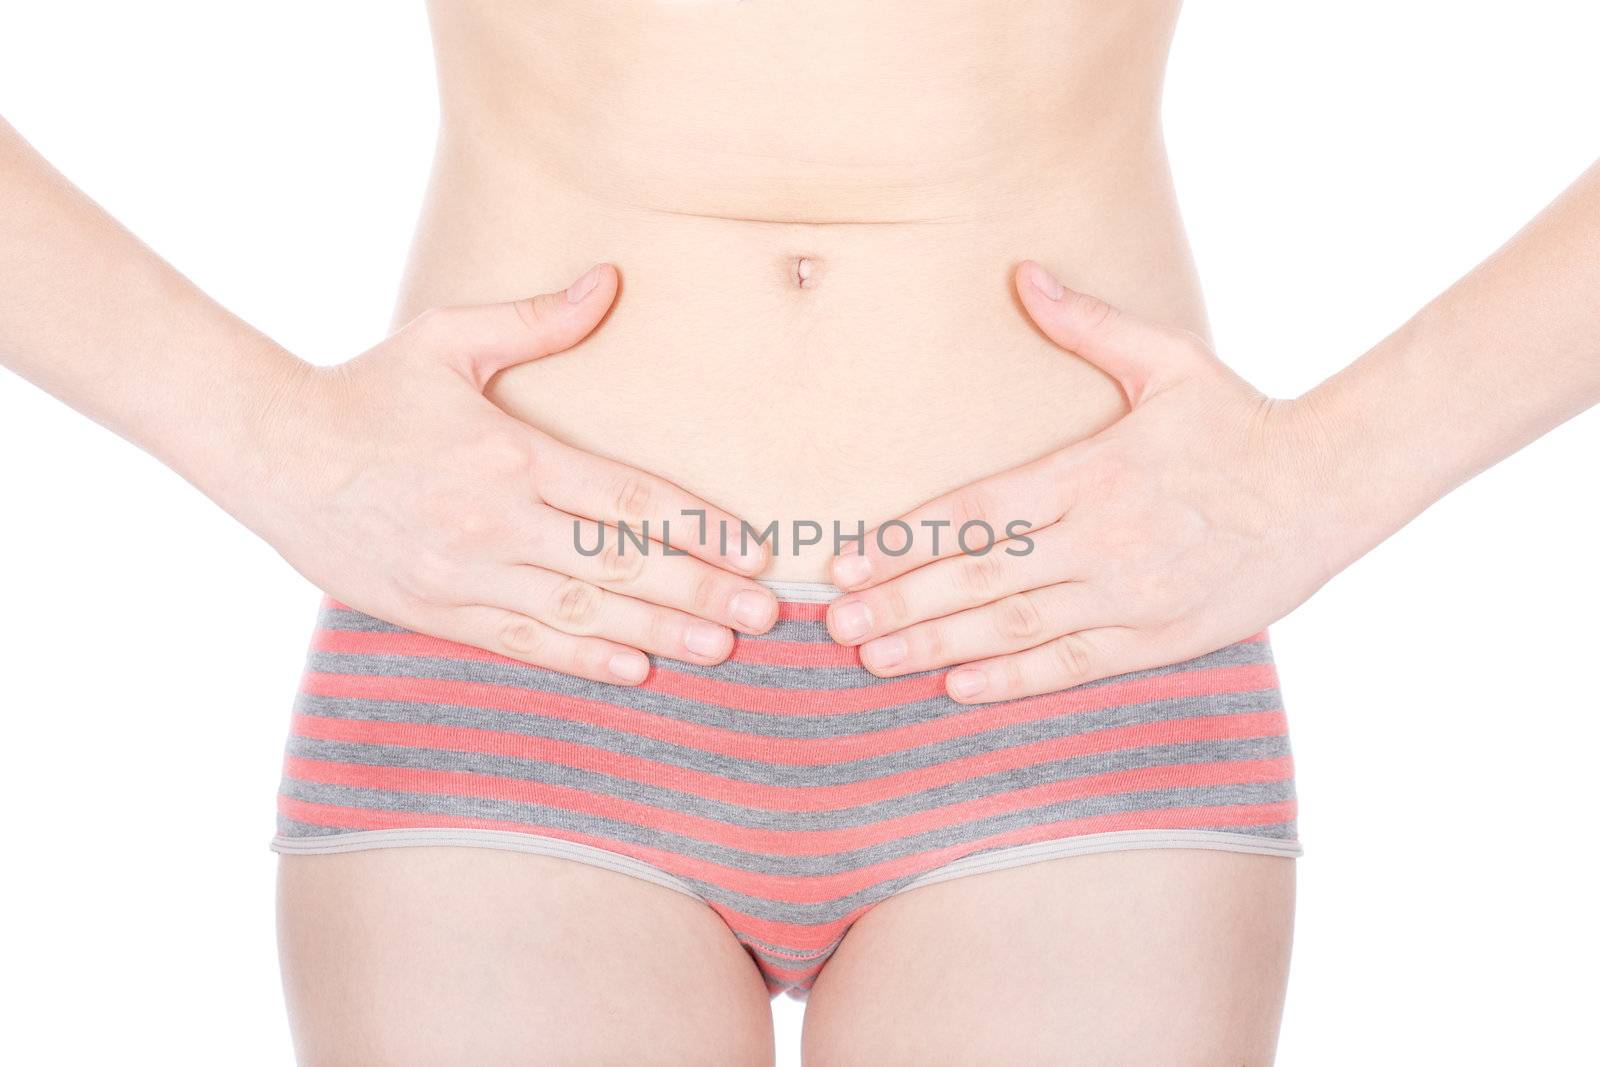 Girl in uderwear having a menstrual pain, isolated on white background